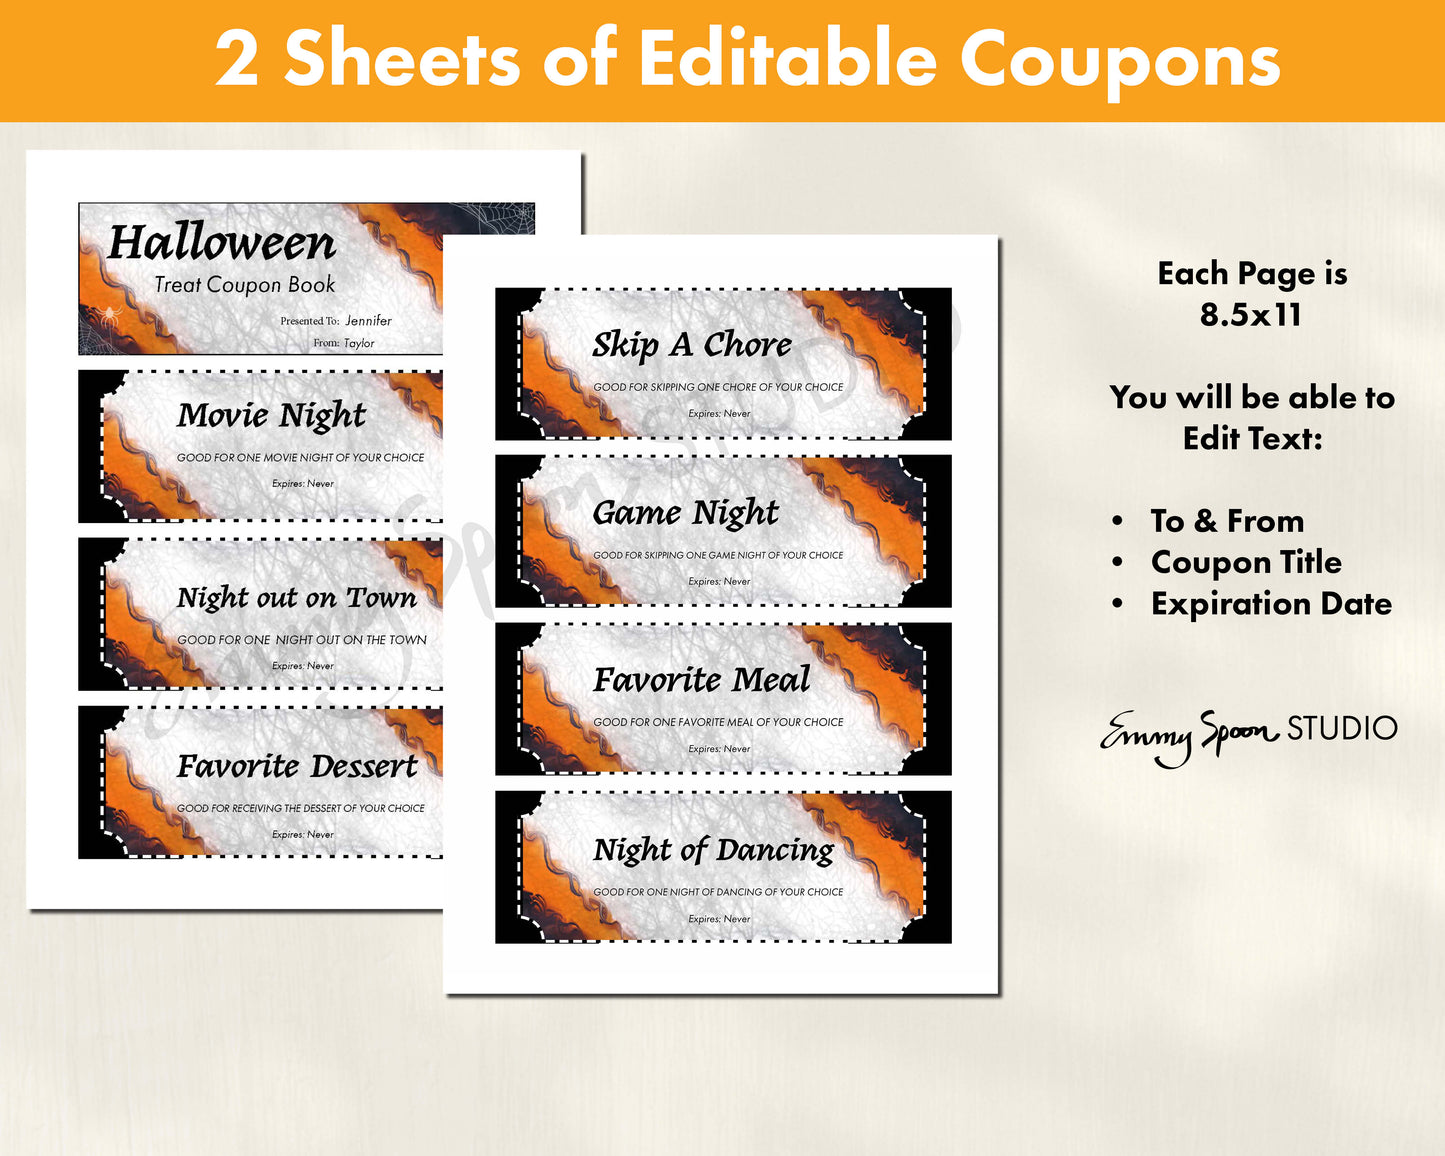 2 Sheets of Editable Coupons. Each page is 8.5x11. You will be able to edit text: to & from, coupon title, expiration date by Emmy Spoon